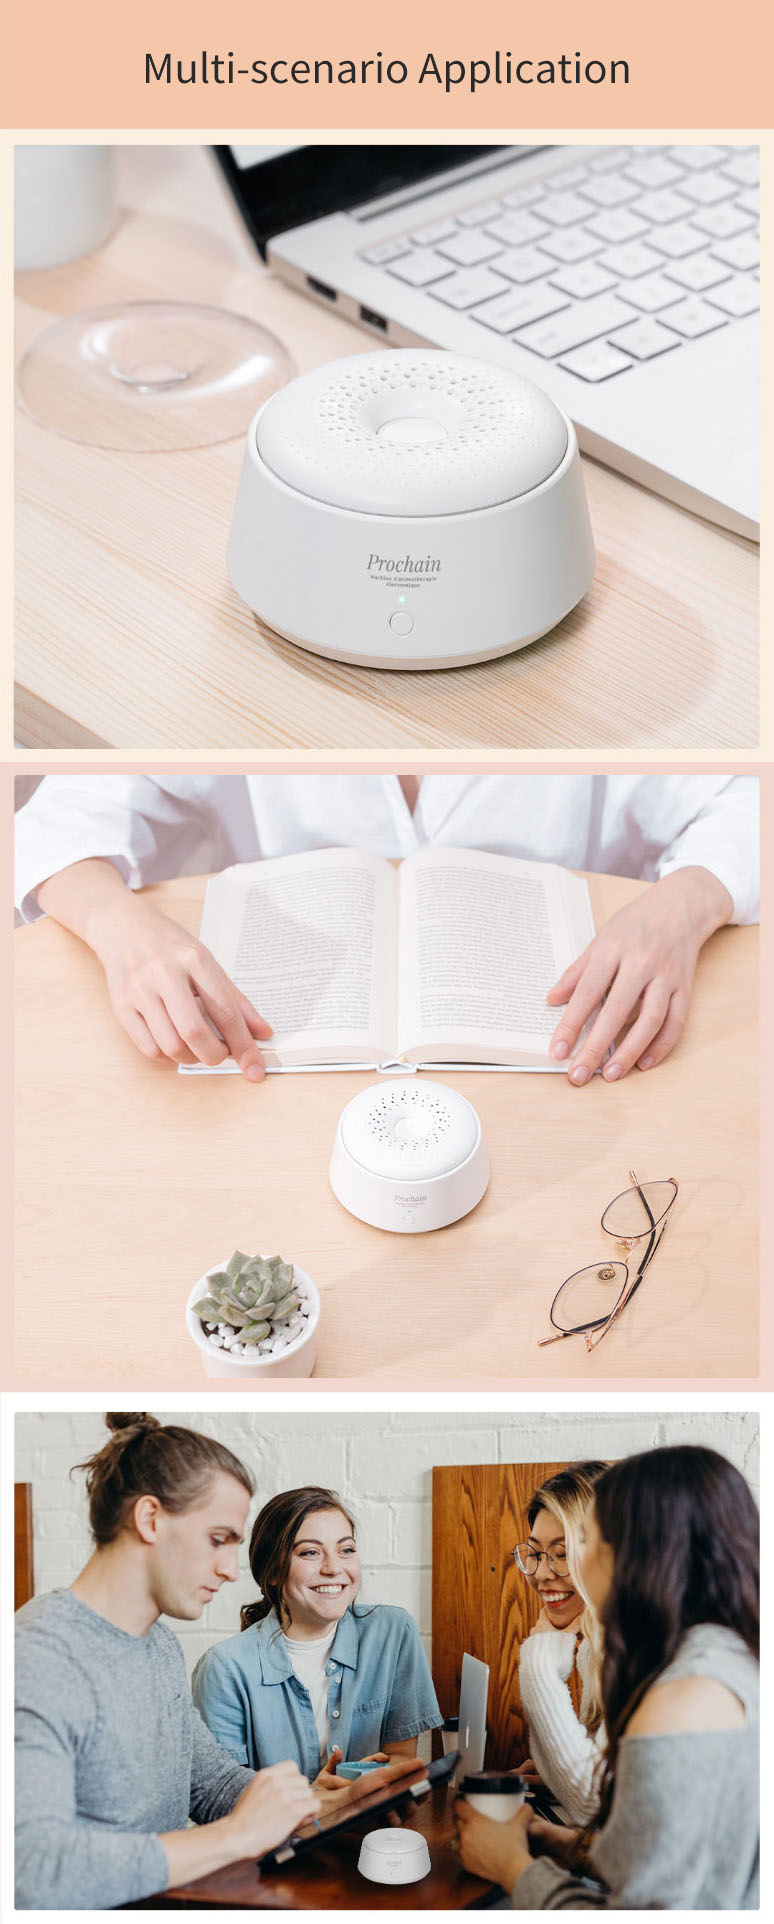 VIVINEVO-45W-Mini-Donut-Electronic-Home-Aroma-Diffuser-with-650mAh-Lithium-Battery-Flower-Fragrance-1547173-9